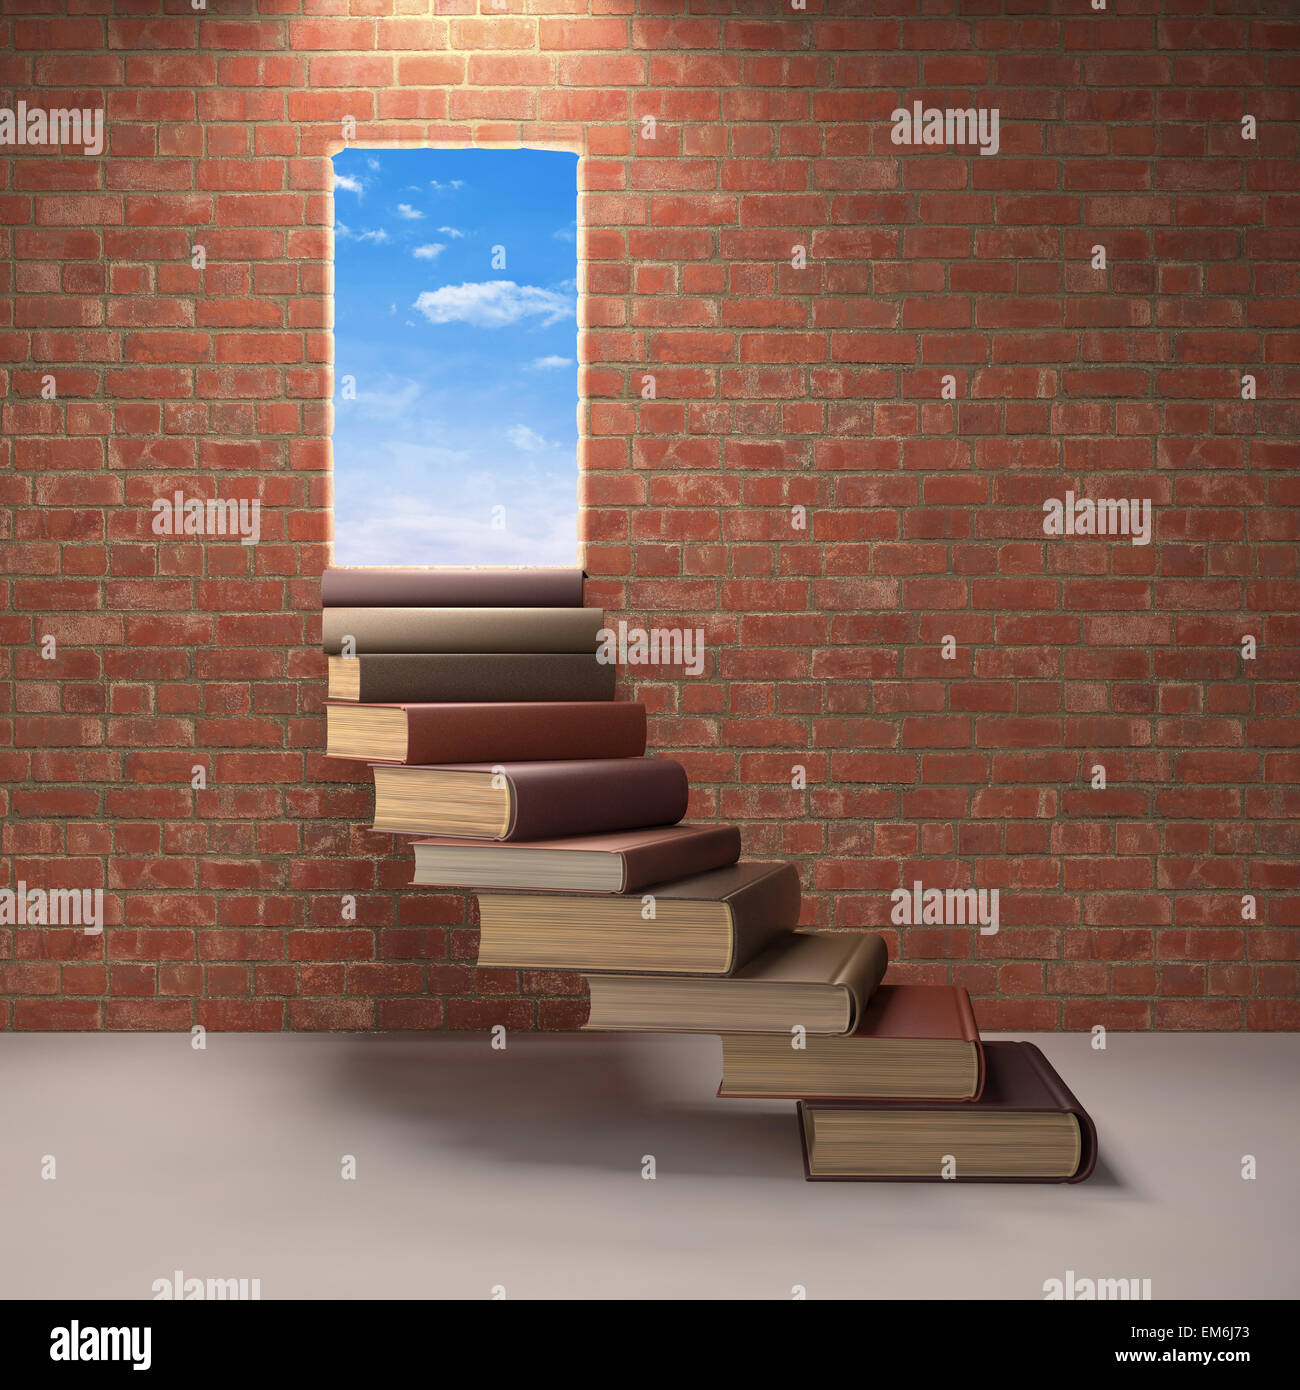 Stairs made of books on a concept of learning and achievement of success. Stock Photo